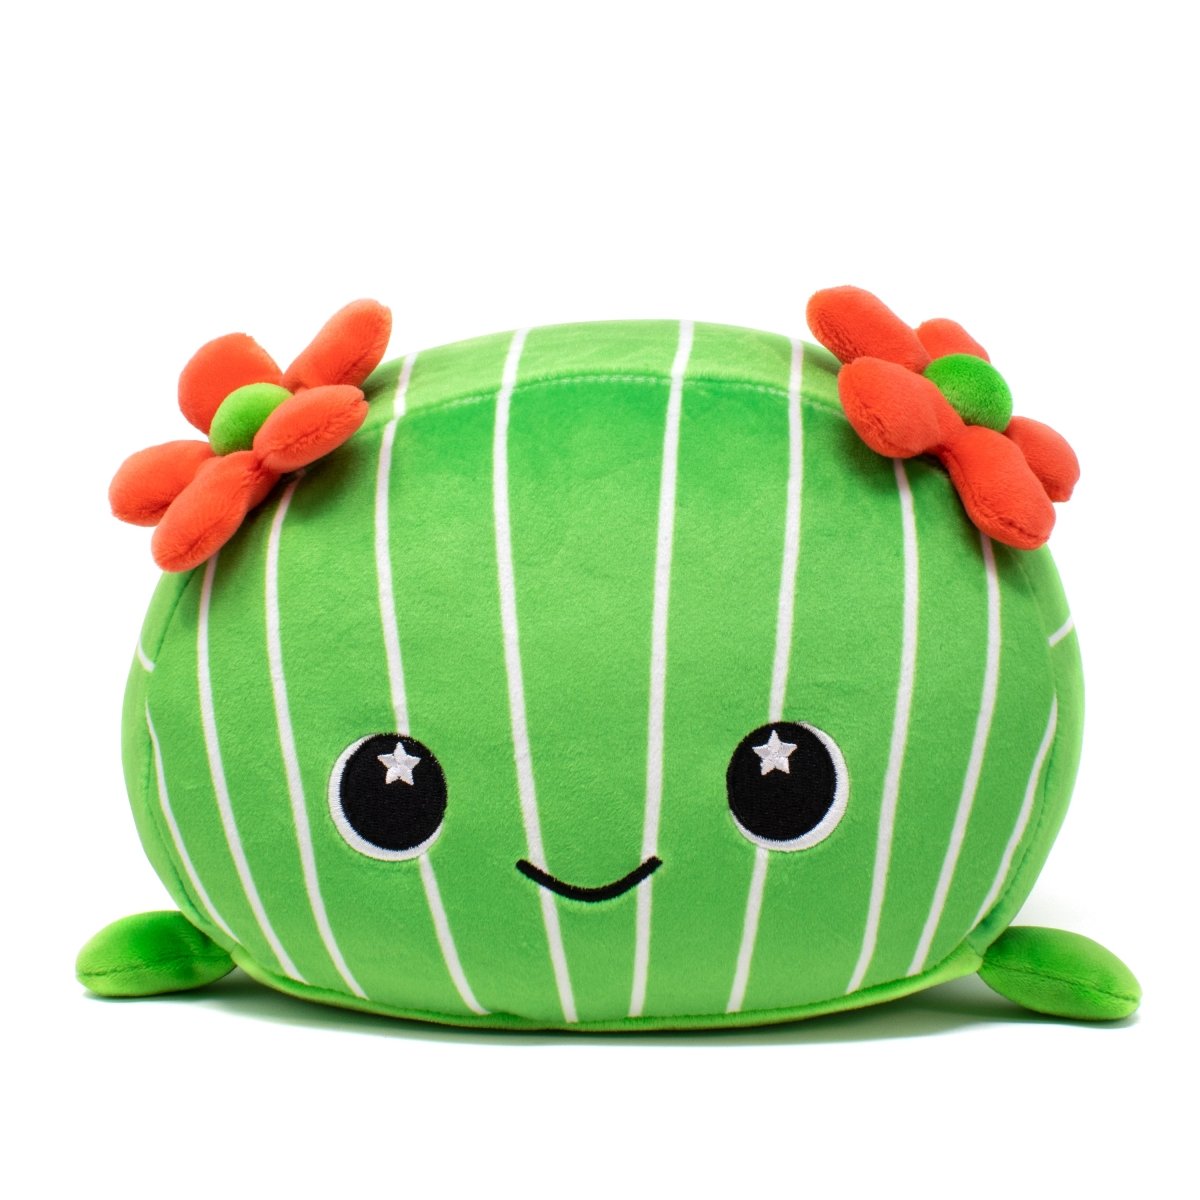 Green Cactus Stuffed Animal with White Stripes and Red Flower Ears